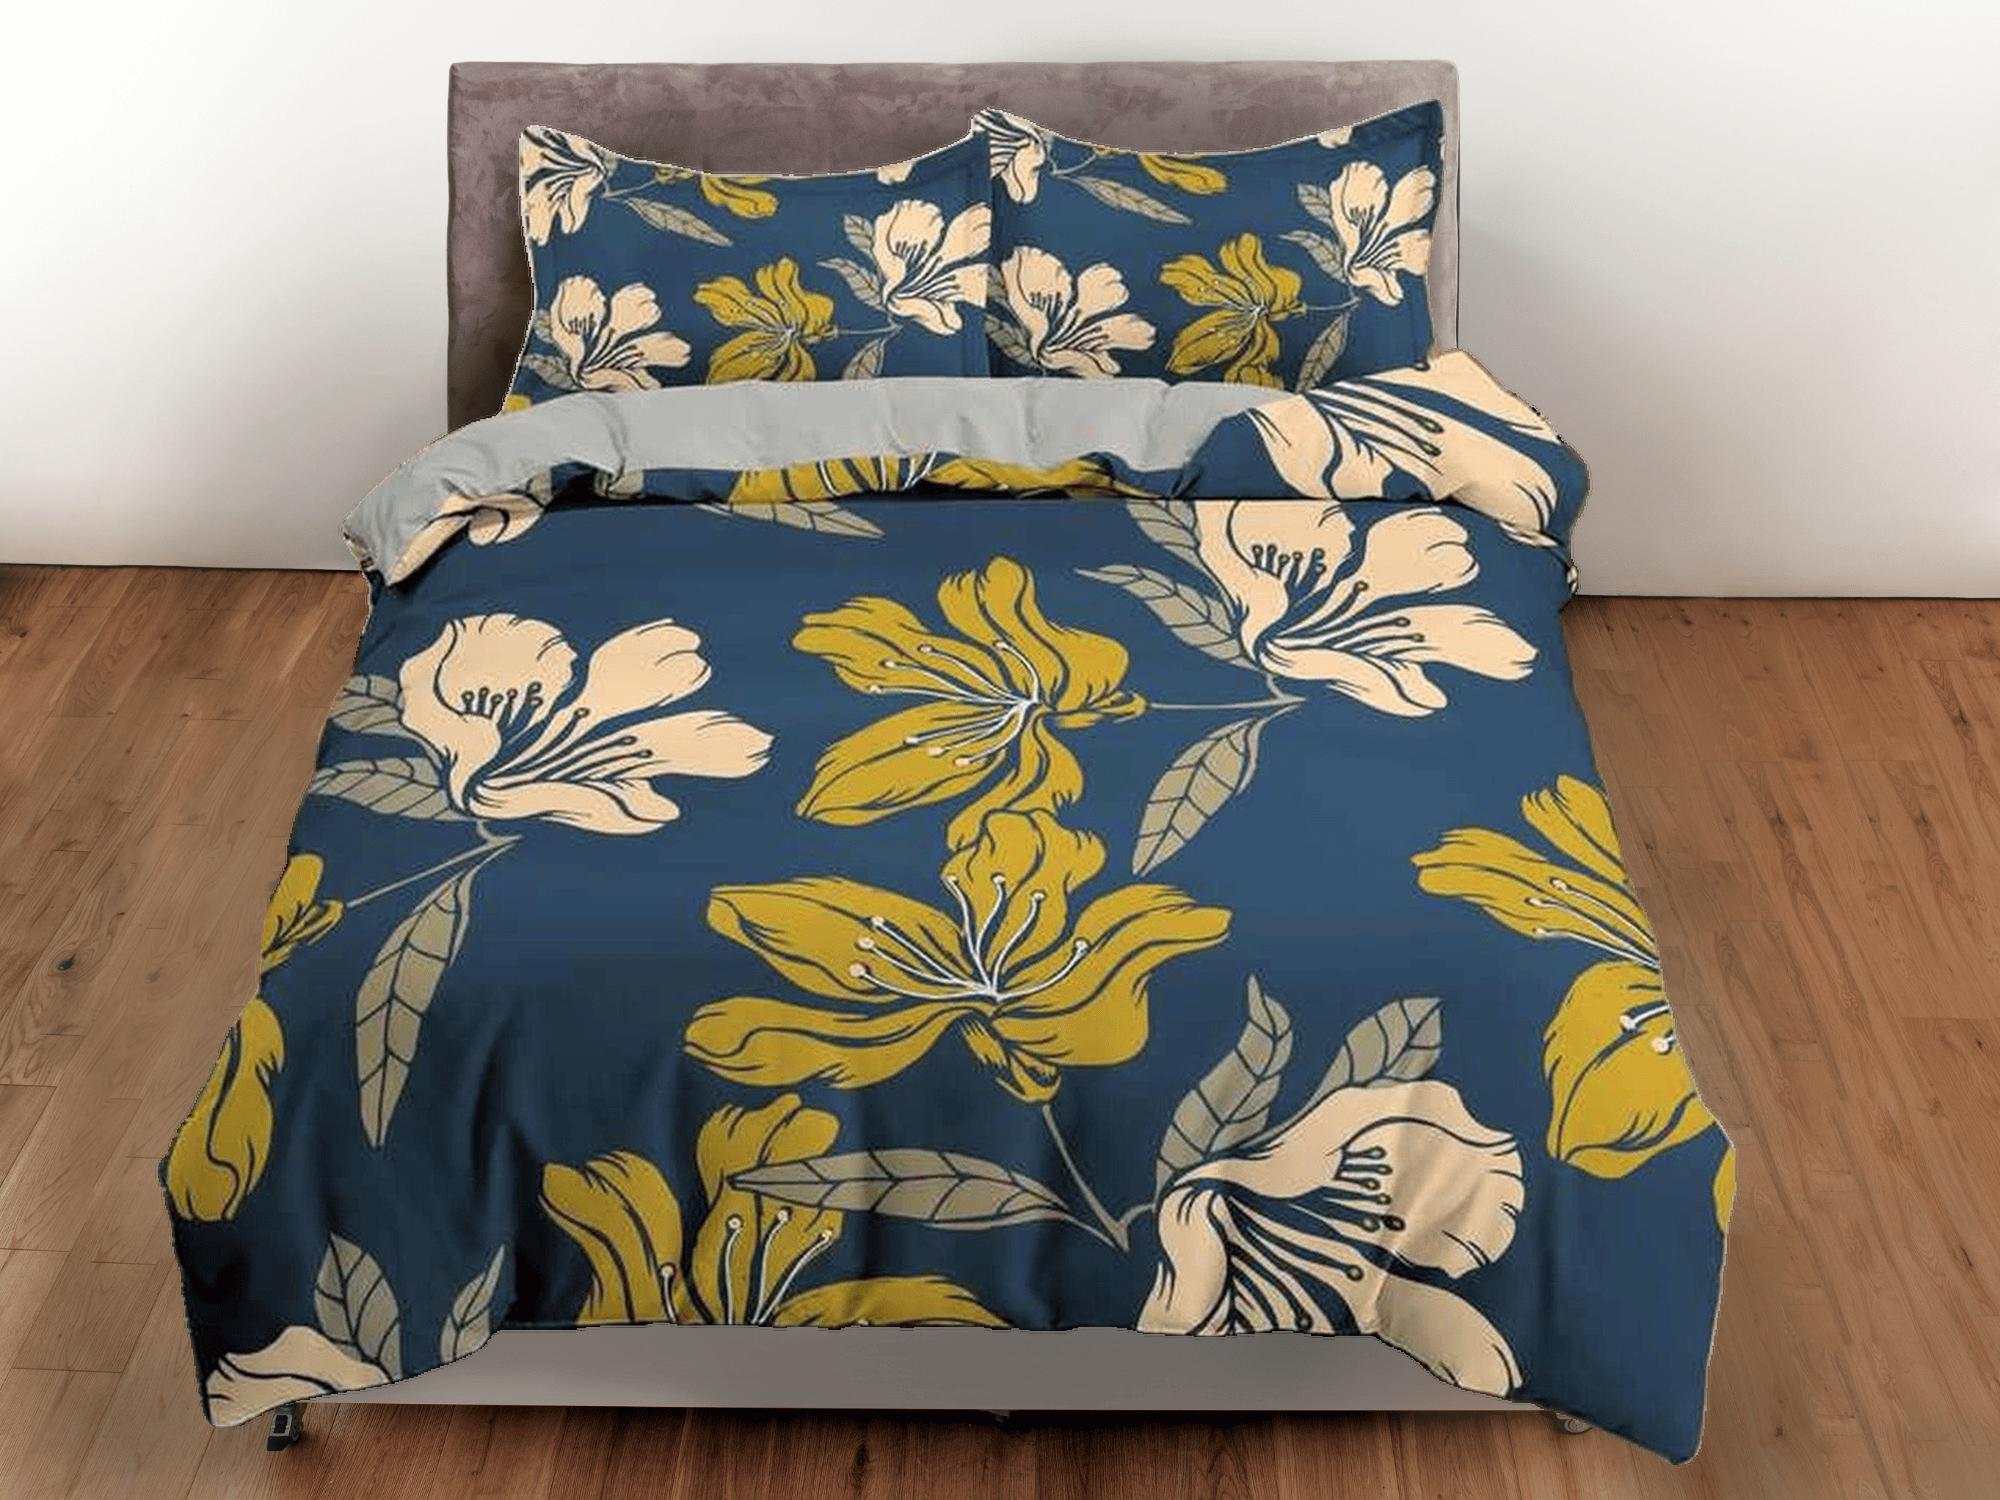 daintyduvet Easter lily floral blue duvet cover colorful bedding, teen girl bedroom, baby girl crib bedding boho maximalist bedspread aesthetic bedding